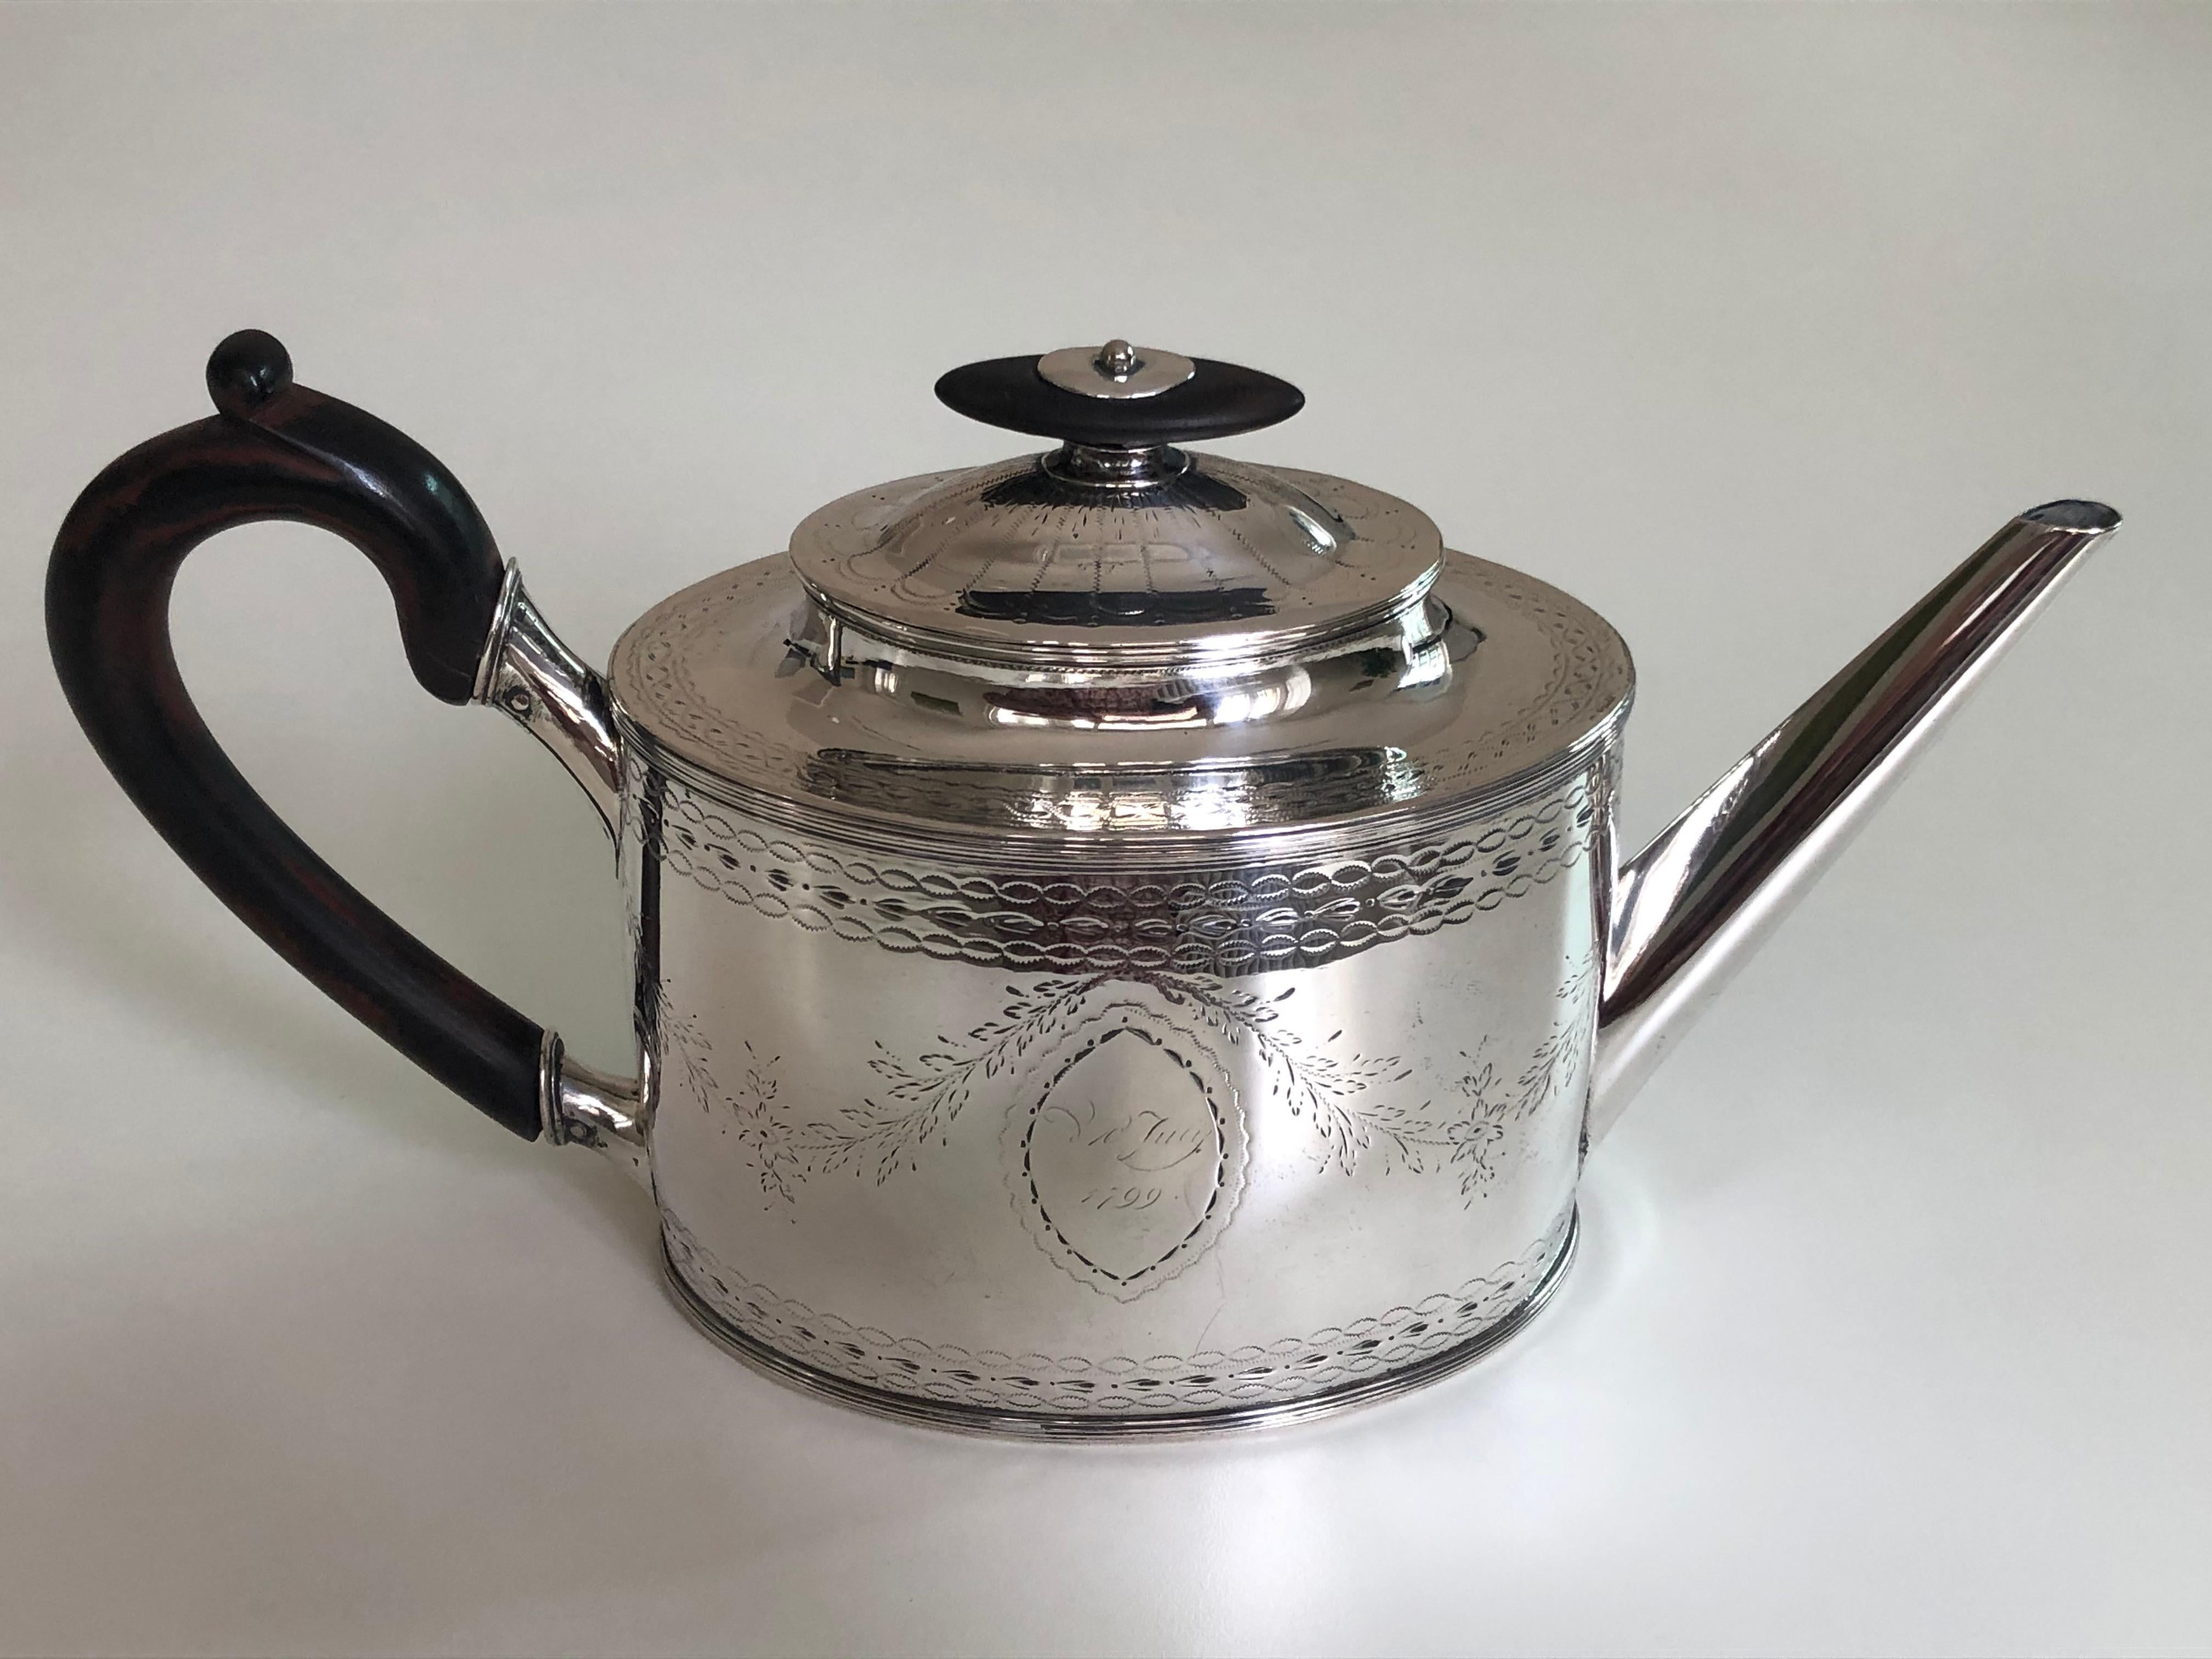 The period Copenhagen made Louis XVI silver pot has an amazing oval shape with ebony handle and finial, topped of with silver tip.
The tea pot is clearly struck hallmarks on the base with the necessary marks:
Maker's mark: ‘BG’ for Bendix Gijsen,